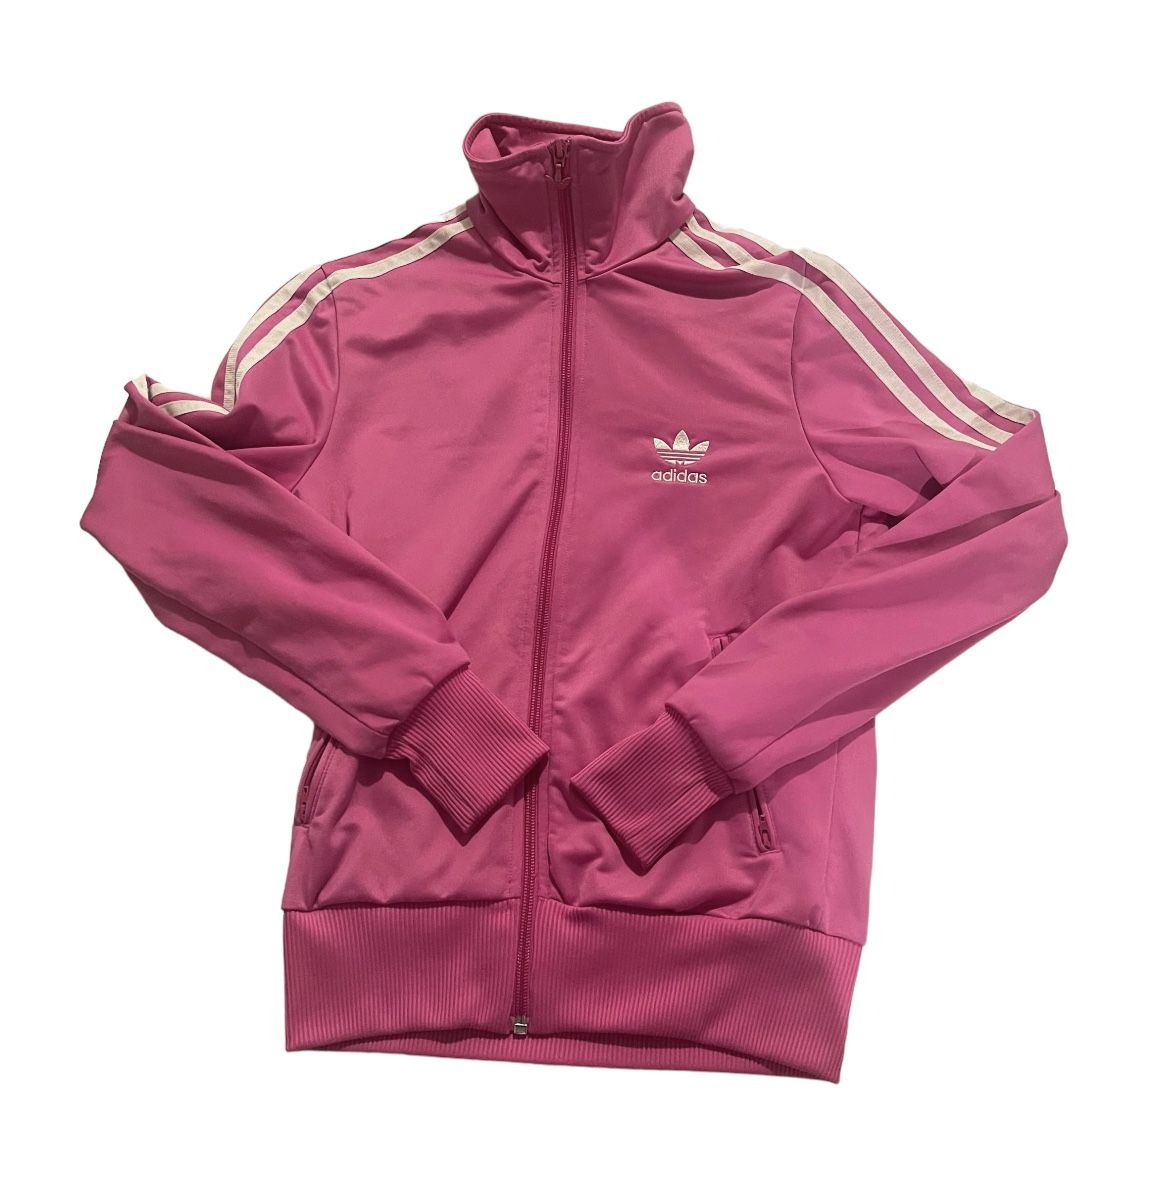 Vriendin precedent Componist Adidas Original Pink Track Jacket Full Zip Women Size Small Activewear  Sports for Sale in Pasco, WA - OfferUp